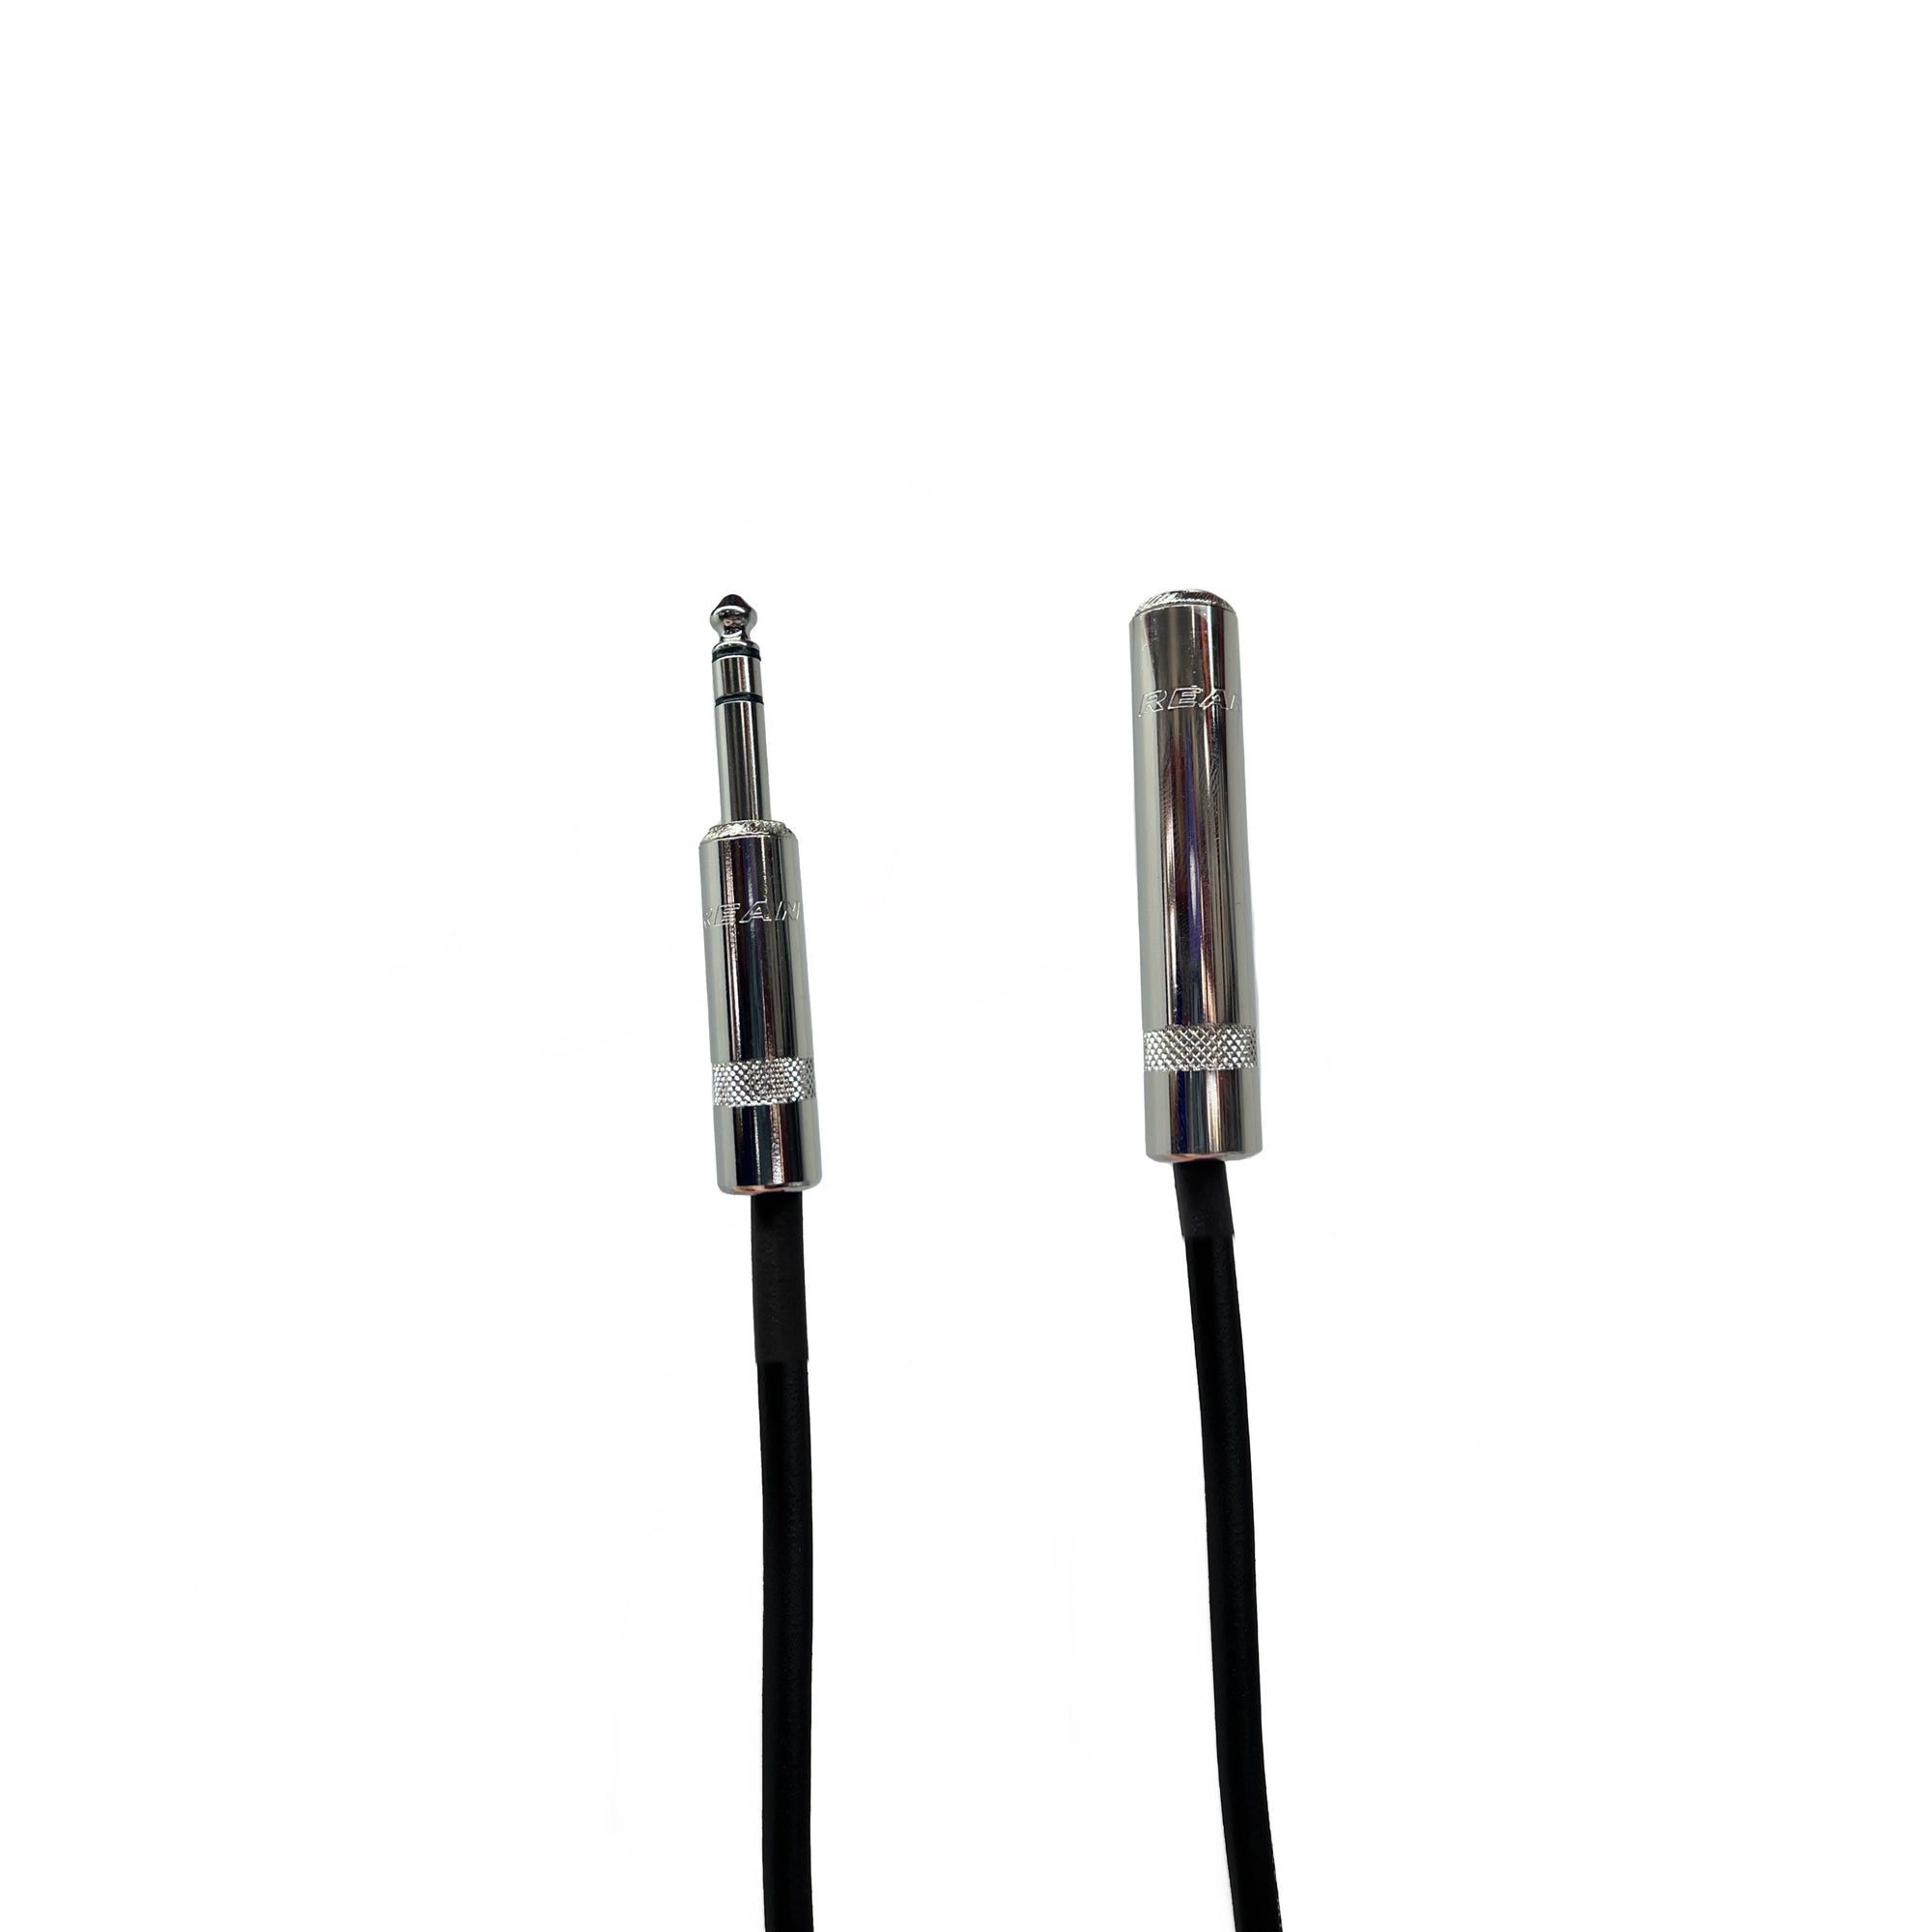 Pro Audio 1/4 inch TRS Extension Cable